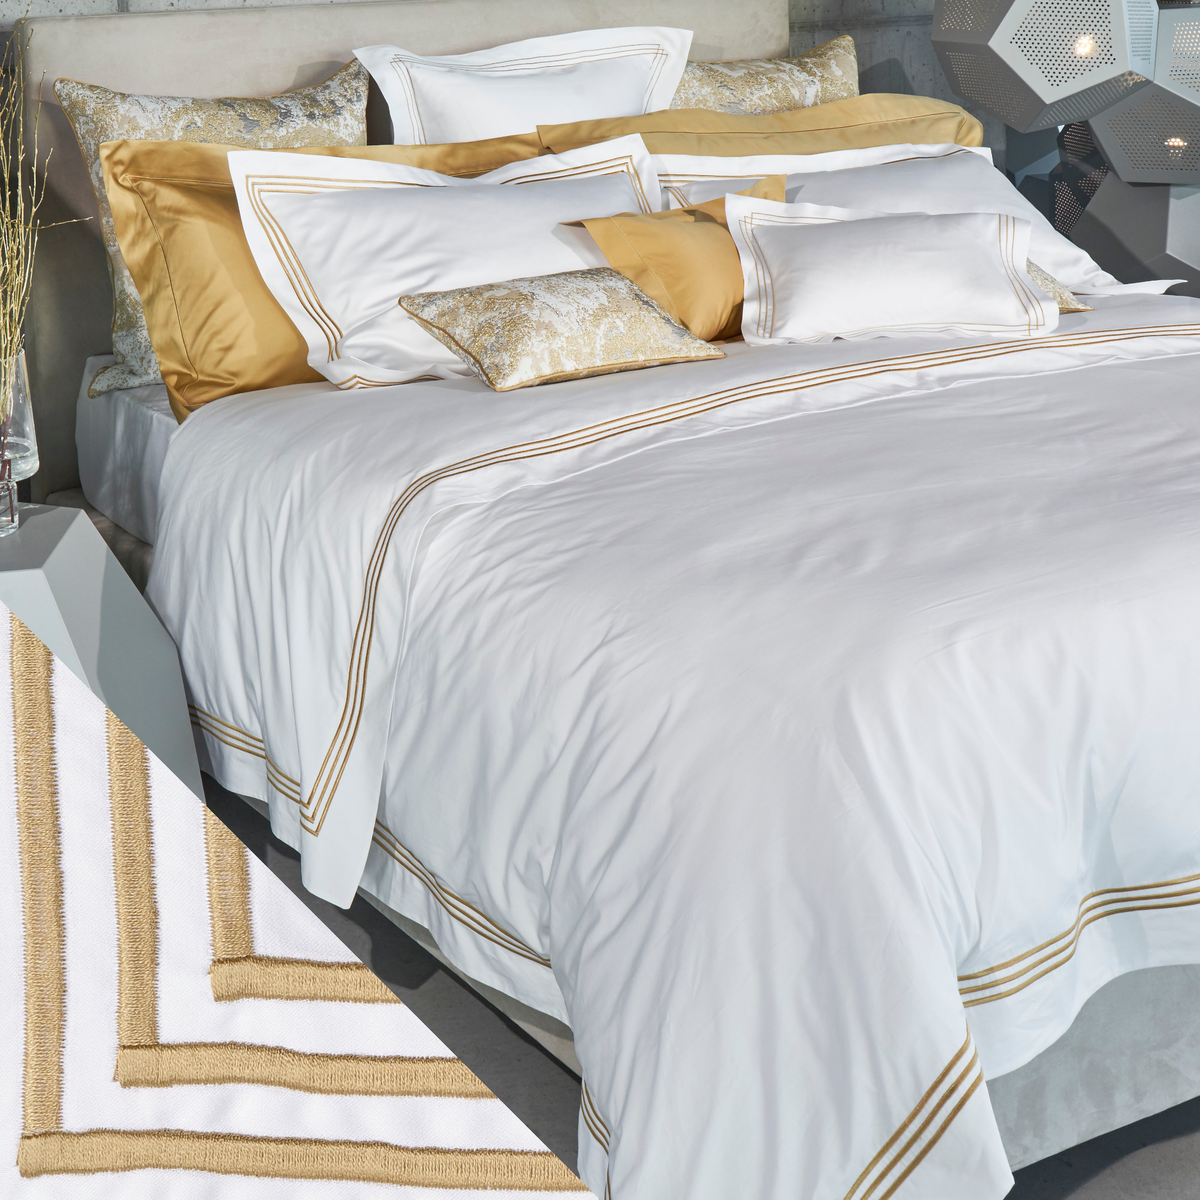 Full Bed Dressed in Celso de Lemos Ram Collection with Gold Swatch